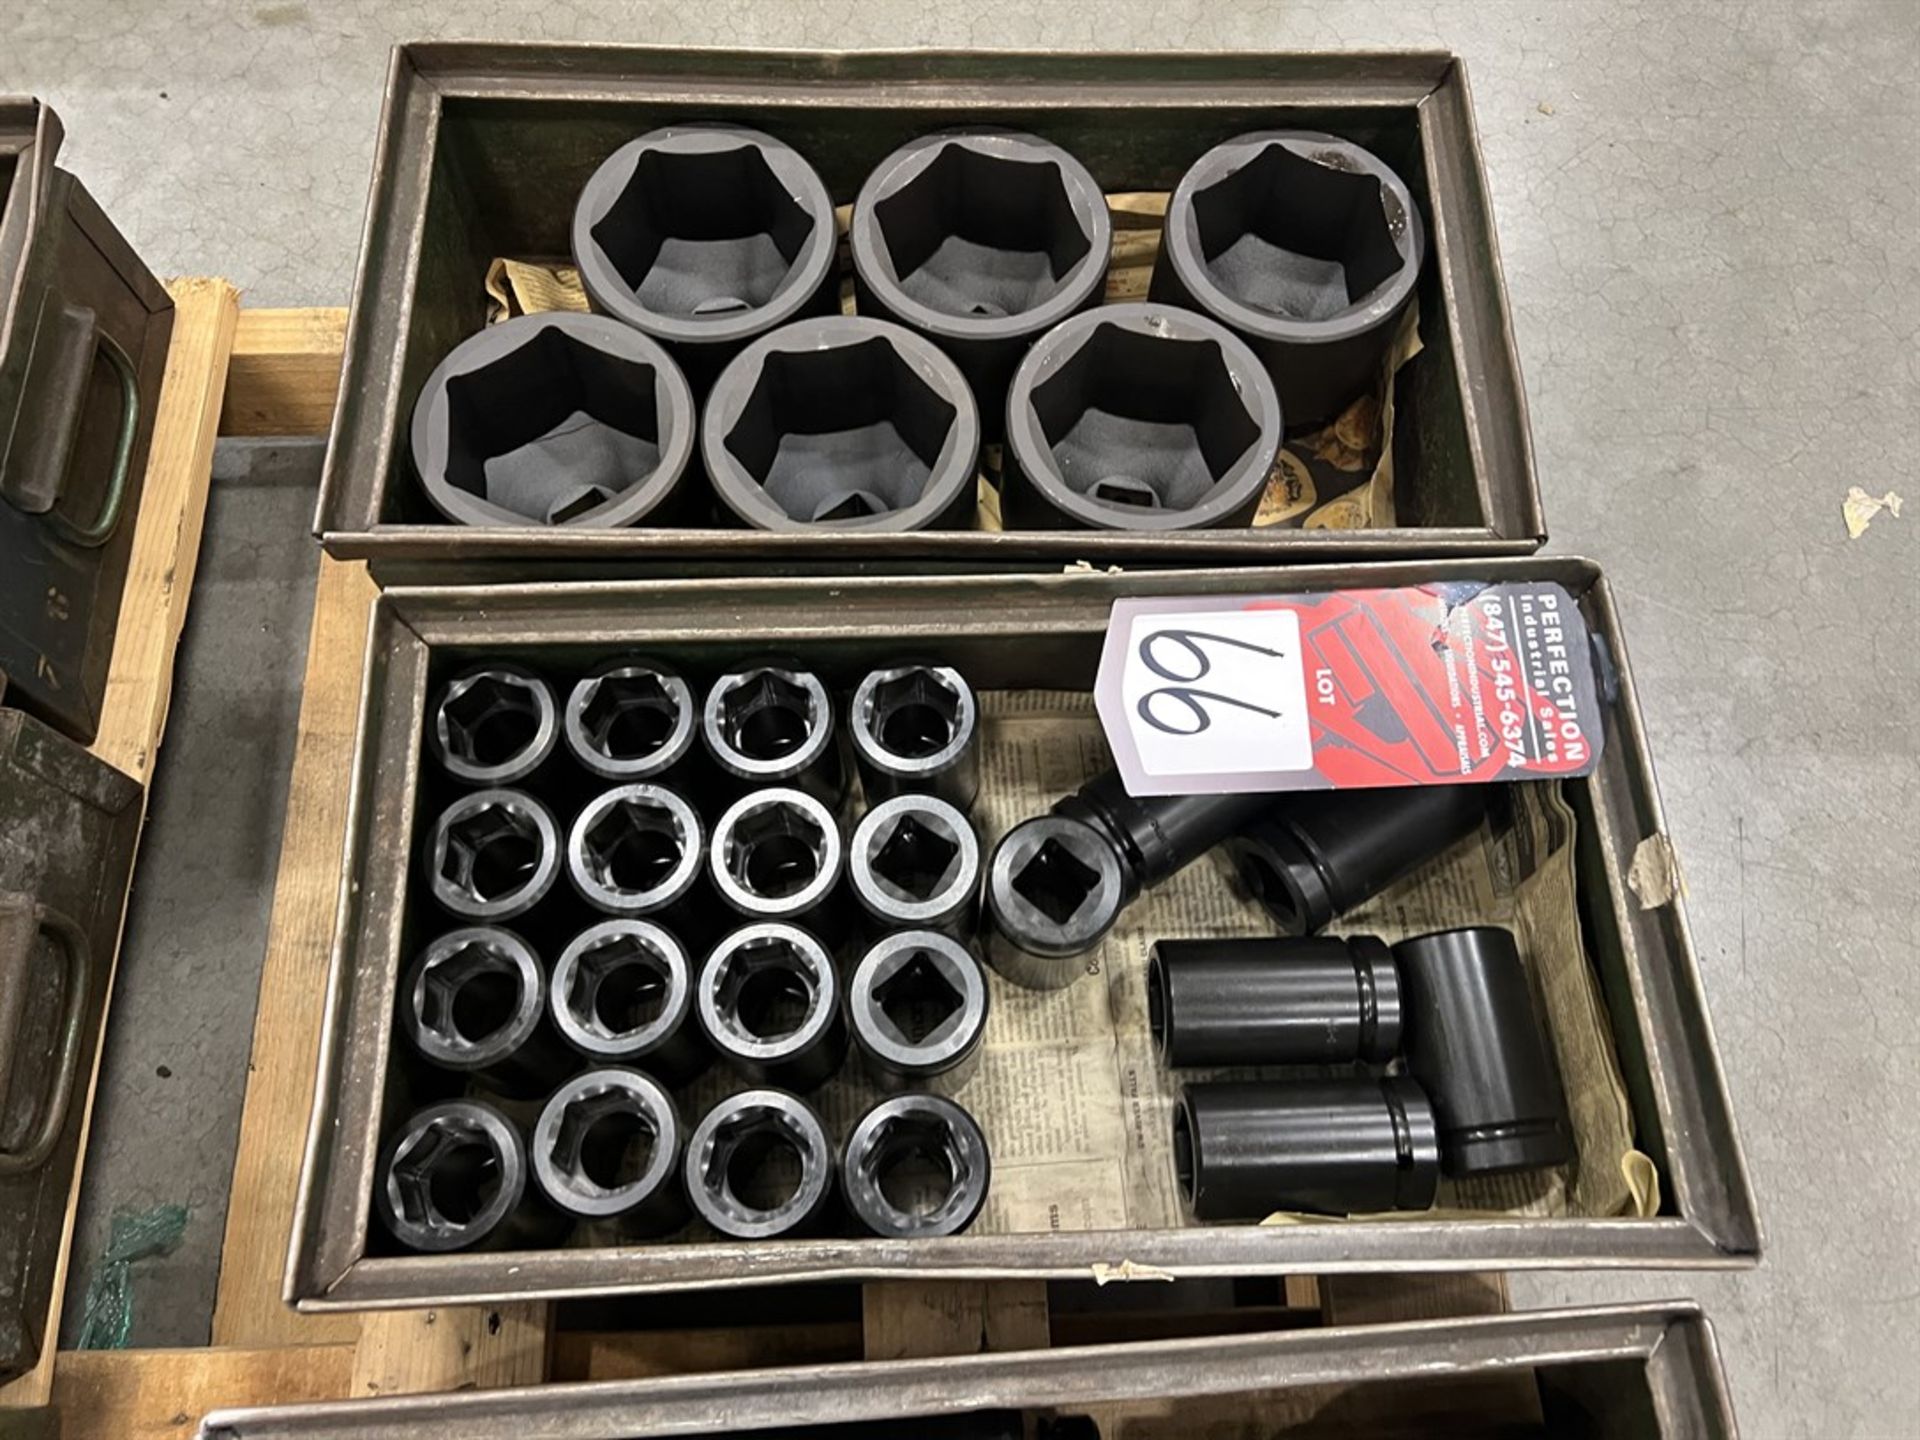 Pallet of 1" Drive Impact Sockets from 1-1/8" to 3-3/8" - Image 3 of 5